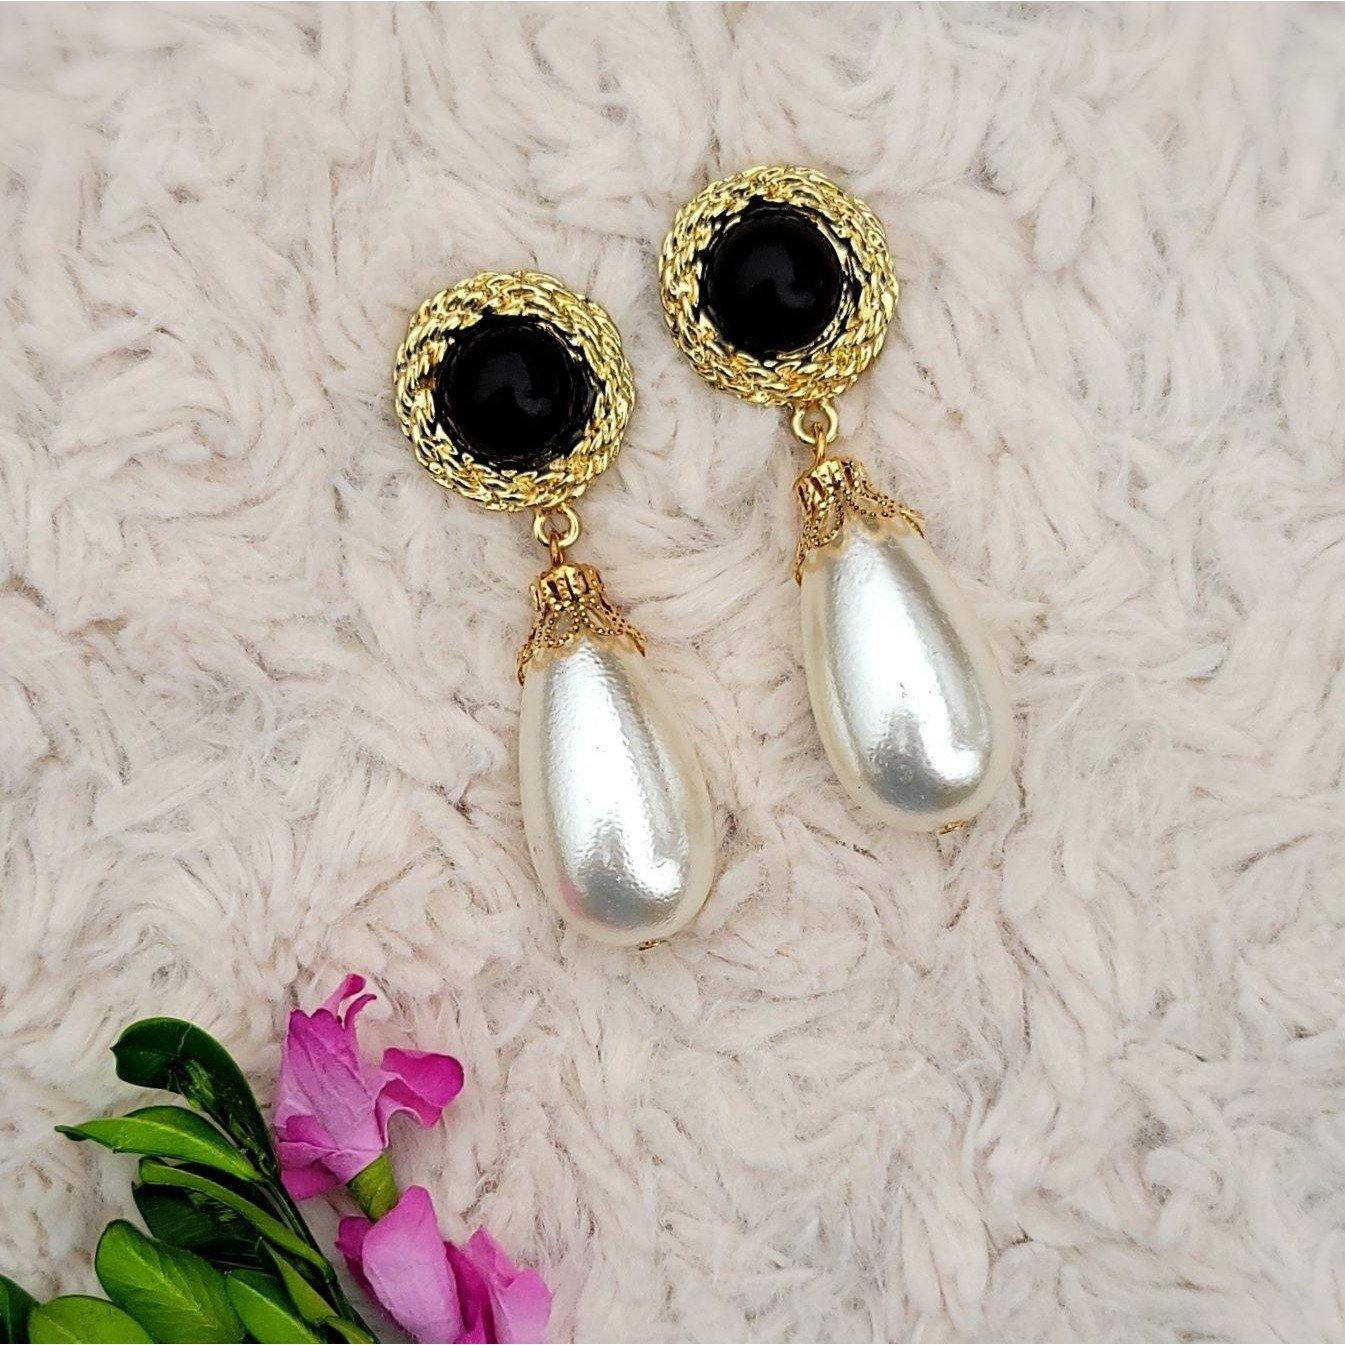 NEW Ivory Faux Pearl Drop Earrings with Black Circle Gem and Gold Hardware - 2" - Accessories - dalia + jade 